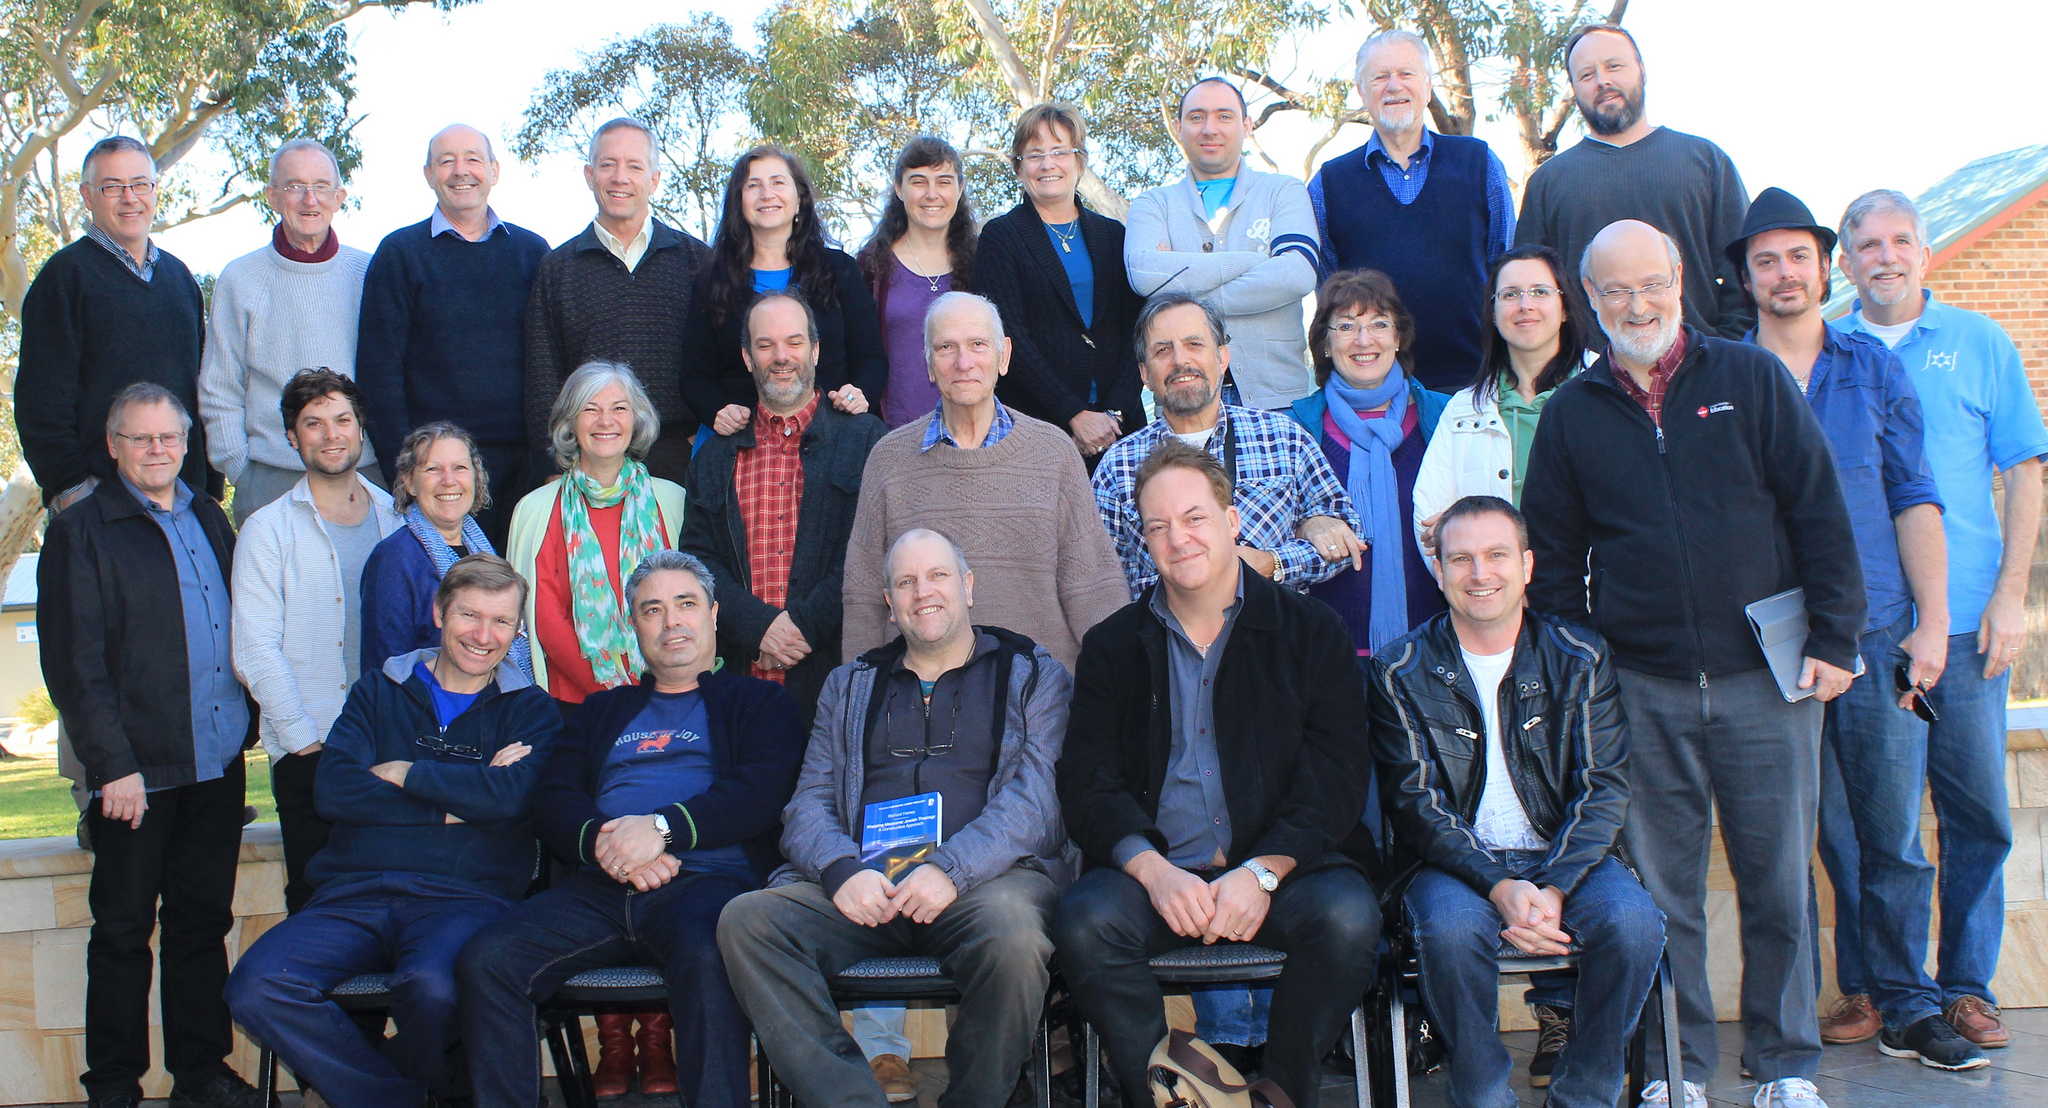 Group photo of Fourth AustralAsia Conference - July 2014